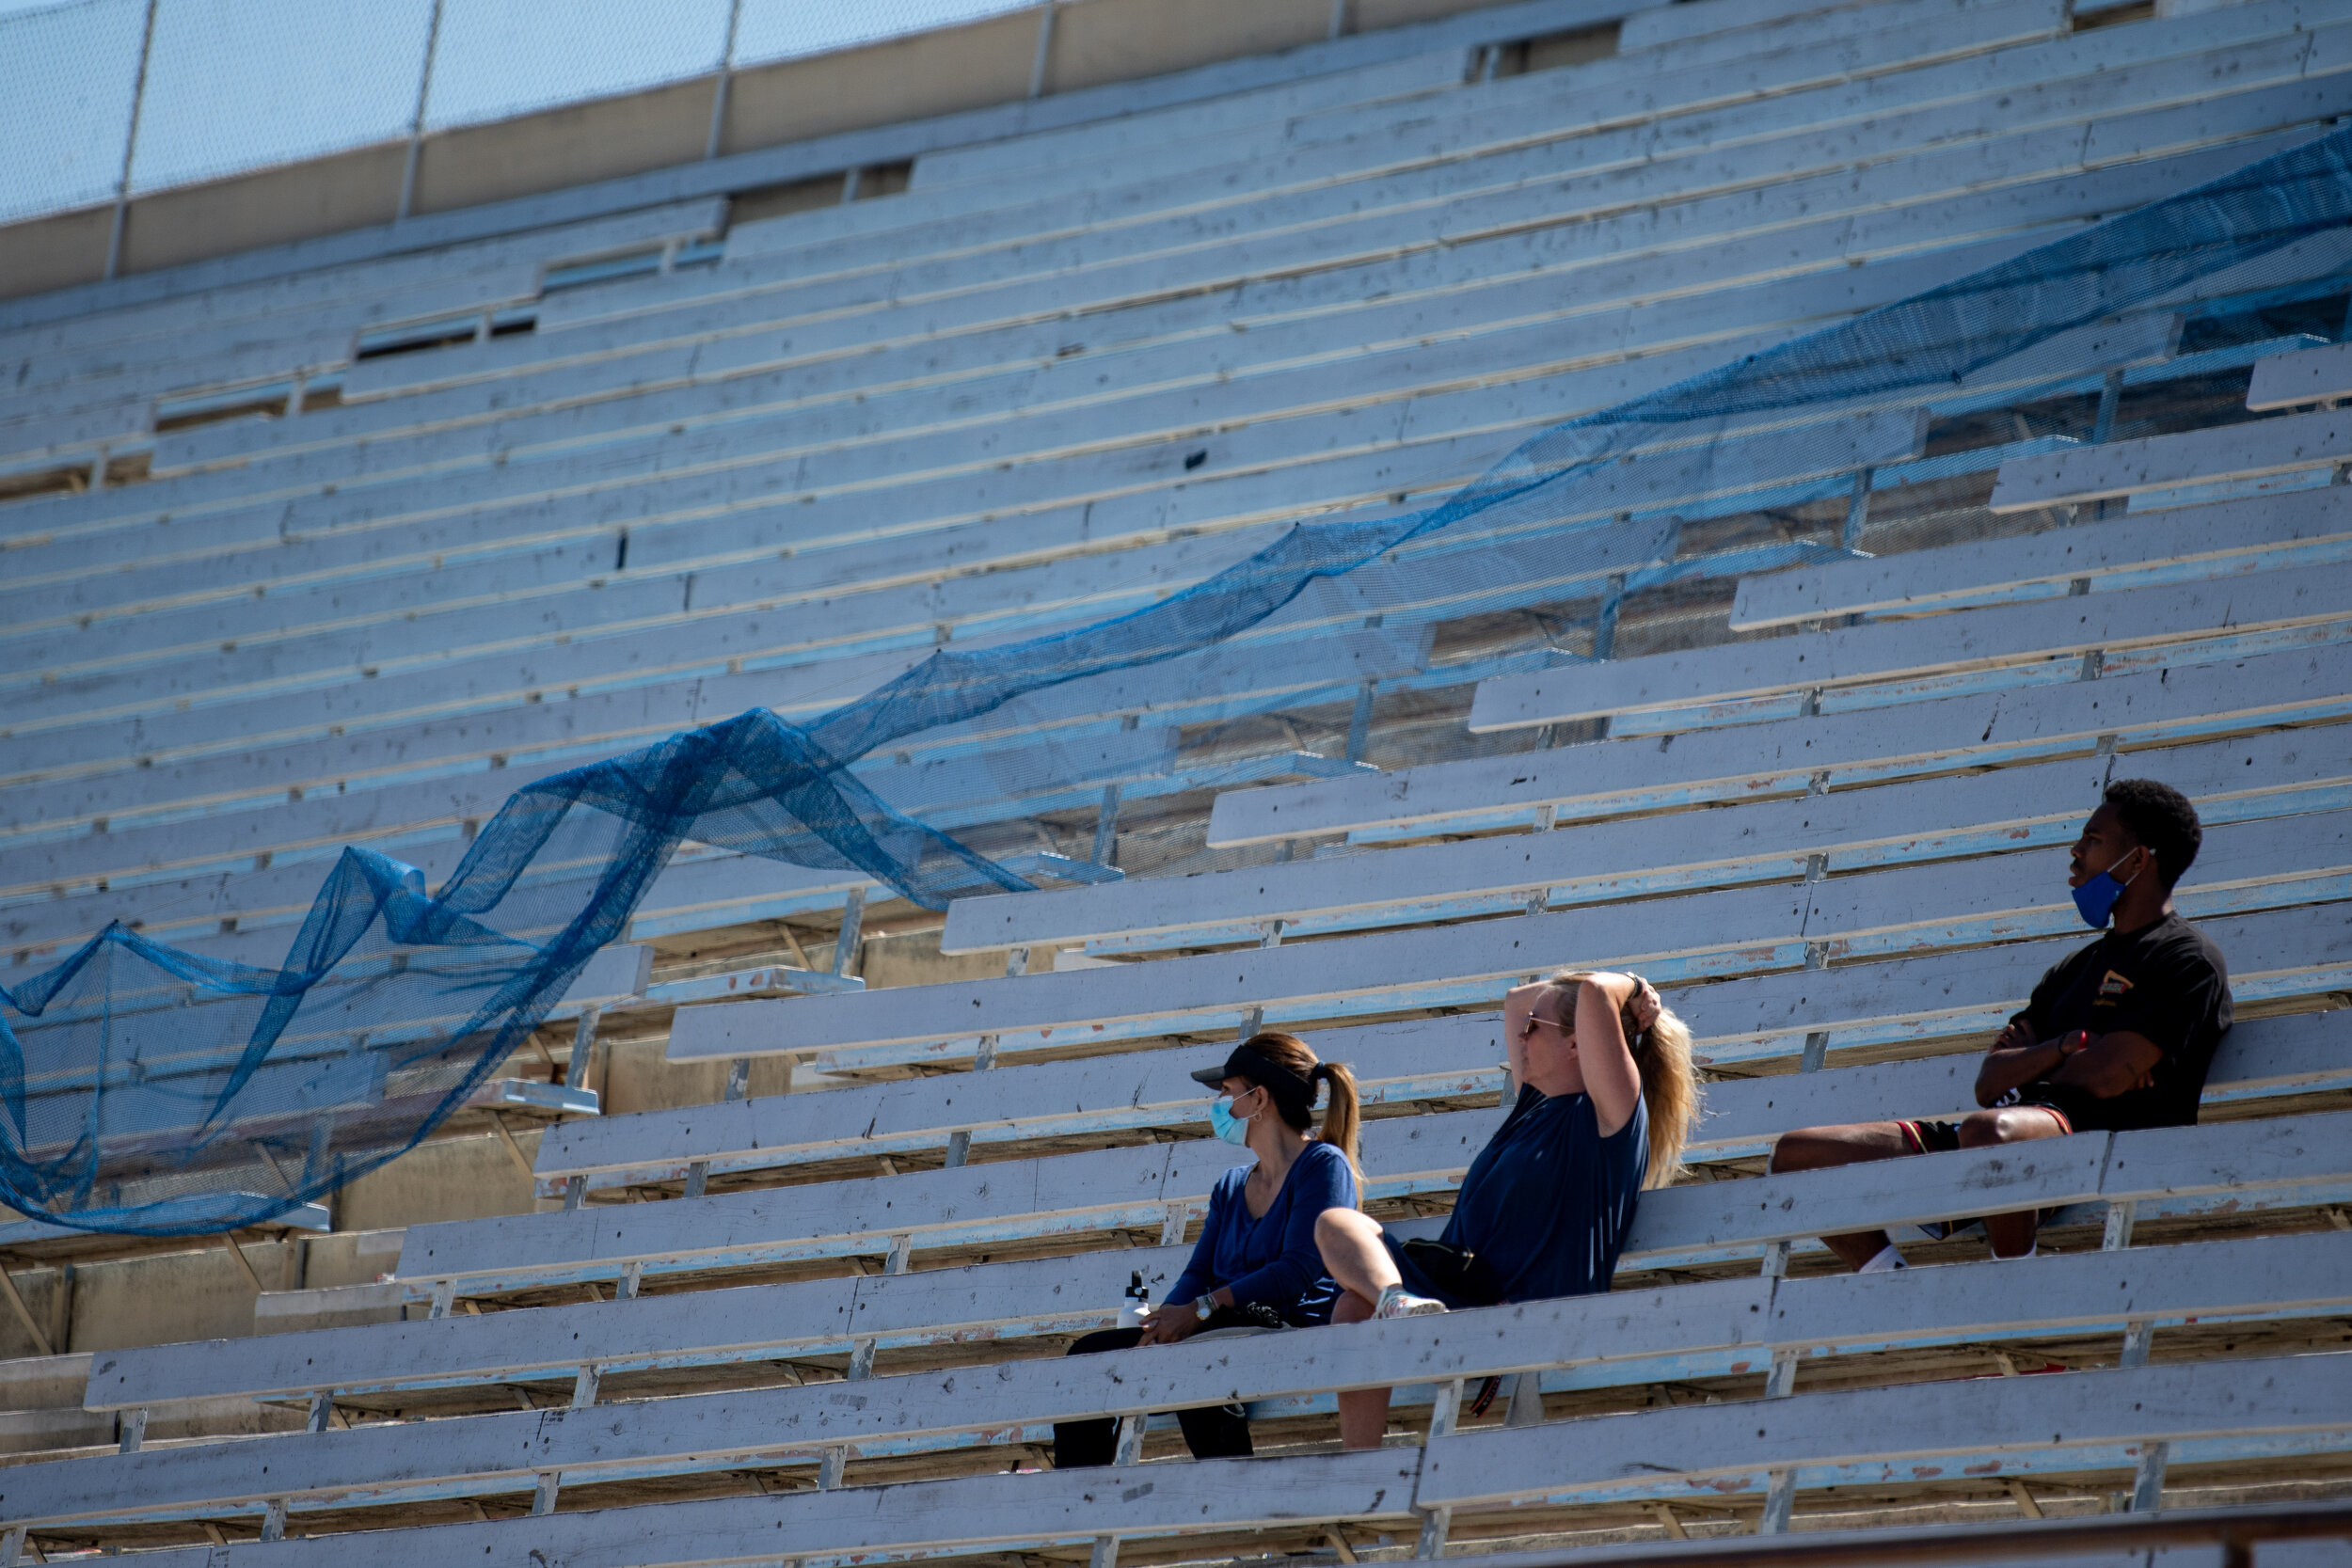  Spectators enjoy the match between Santa Monica College's women's soccer team and Charlie College's own on the Santa Monica College Corsair Field in Santa Monica, Calif. on September 10, 2021. While in-person sports are returning, many are continuin